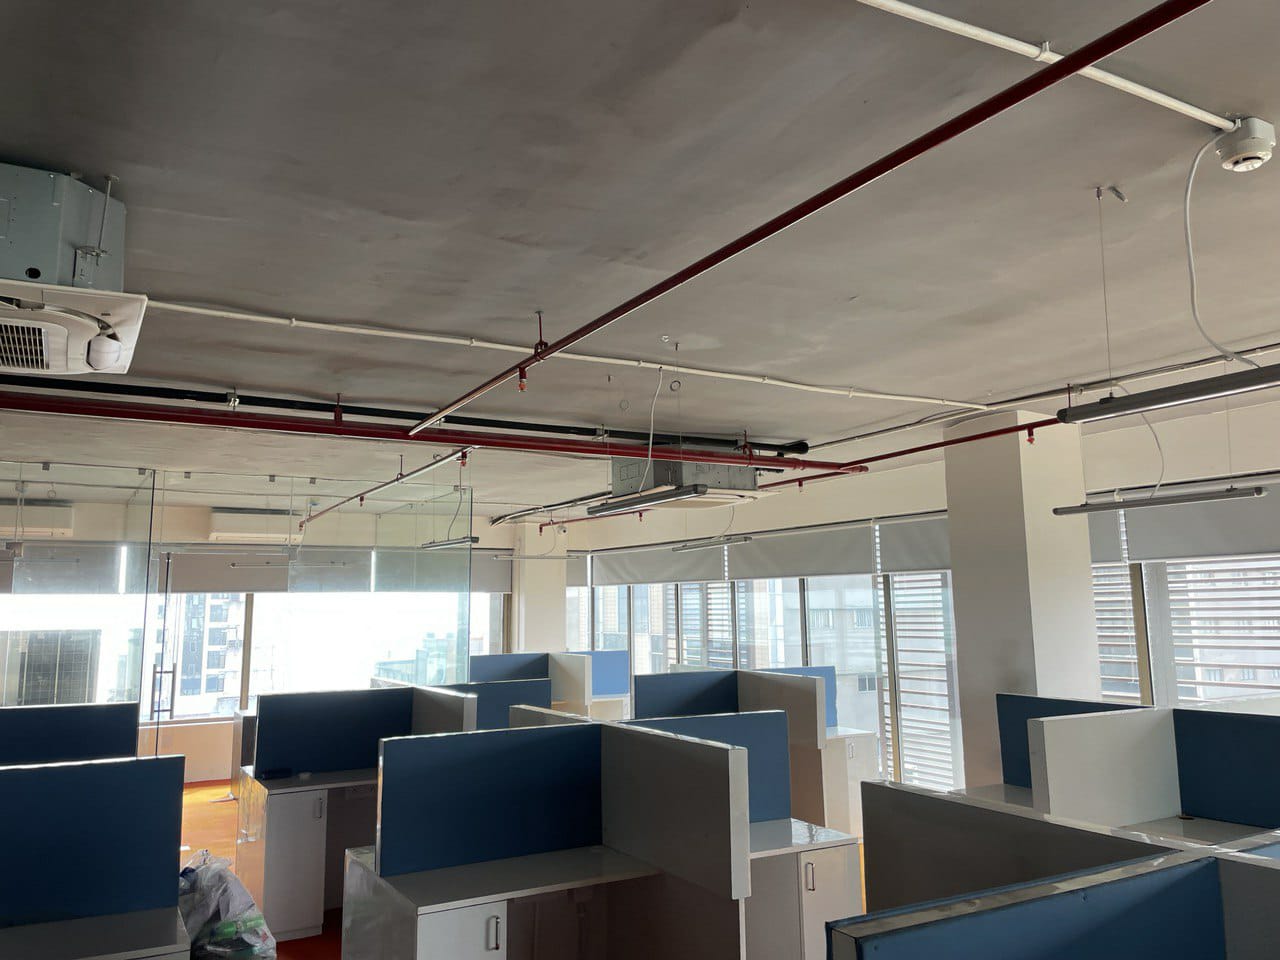 1861 Sq Feet Office Space for Rent Only in Ultadanga